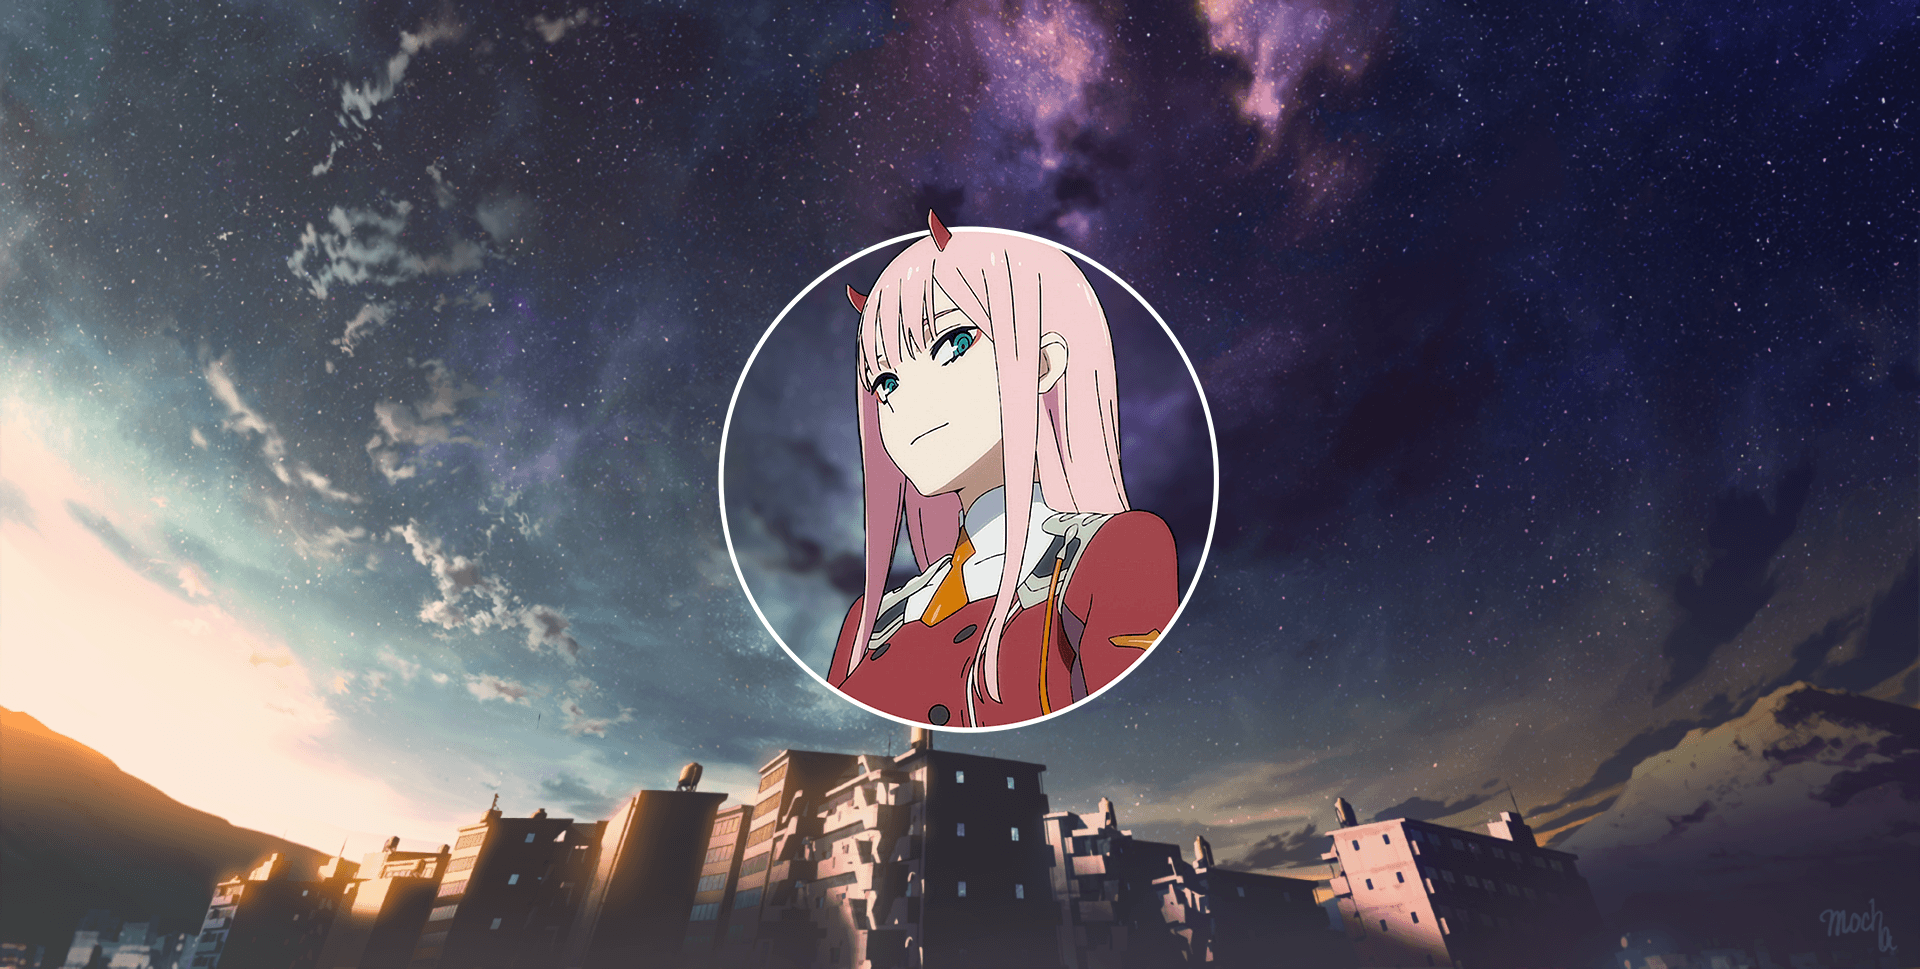 Zero Two Wallpaper Background Image. View, download, comment, and rate. Darling in the franxx, Anime wallpaper, Background image